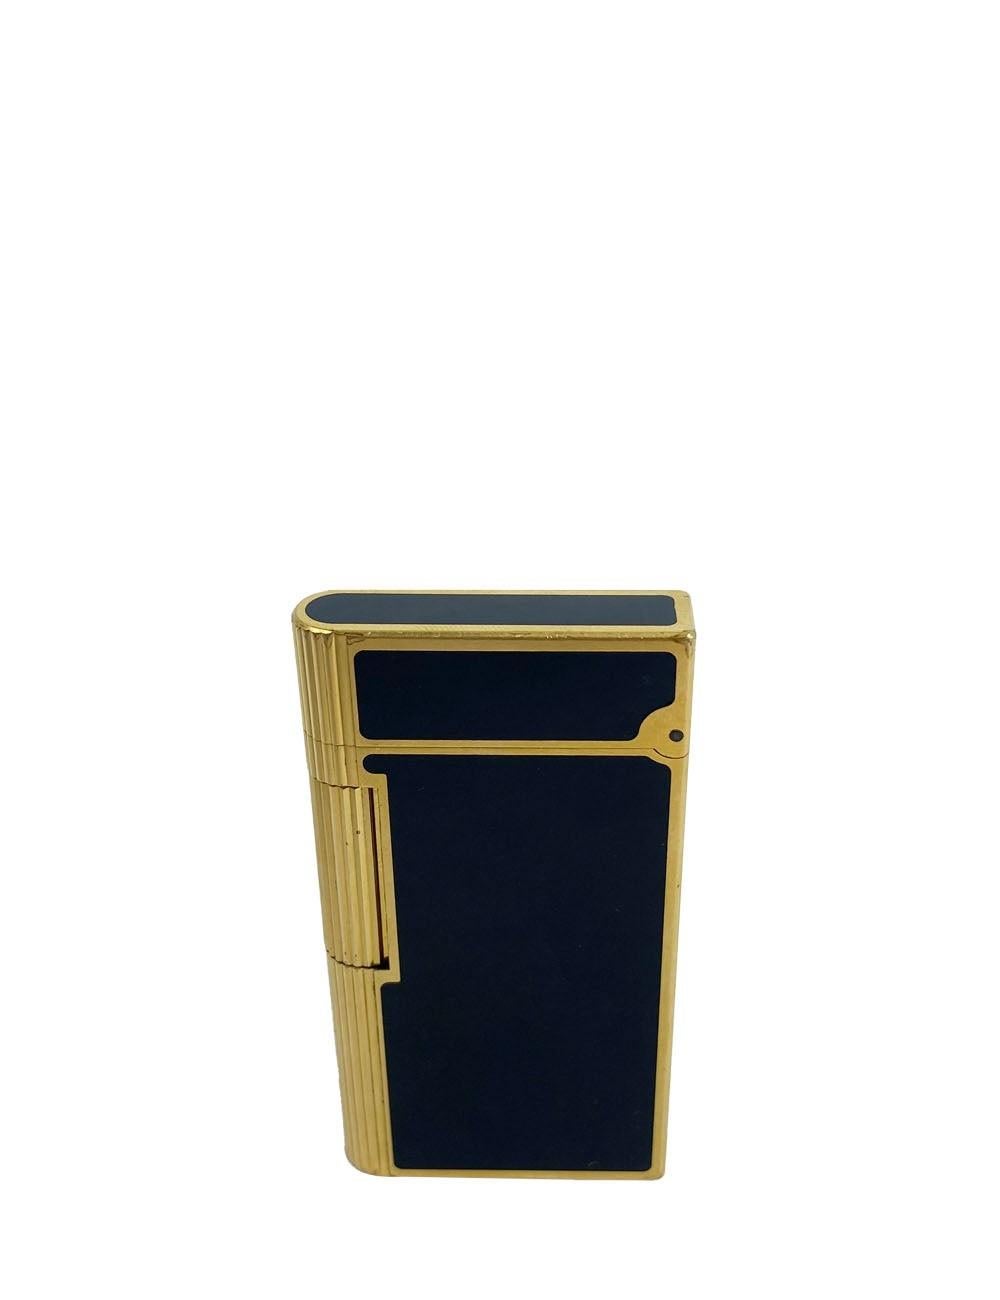 Caran d’Ache Gold Black Lighter

Additional information:
Overall condition: Gently loved / Light scratches